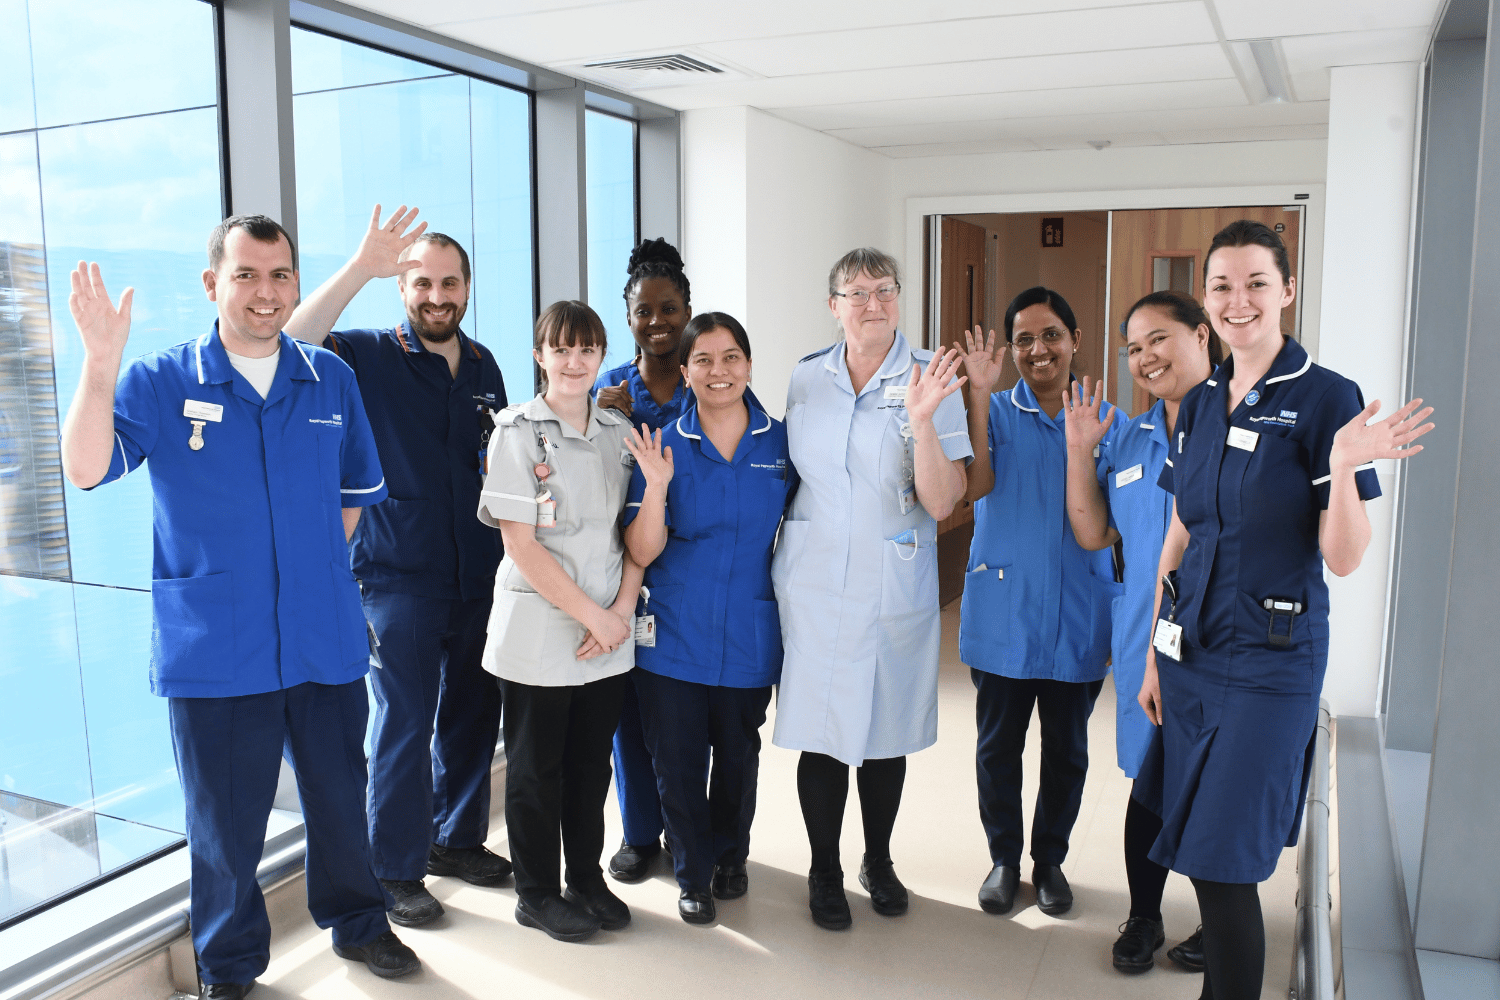 Nine nurses in different shades of blue smiling in a corridor. 